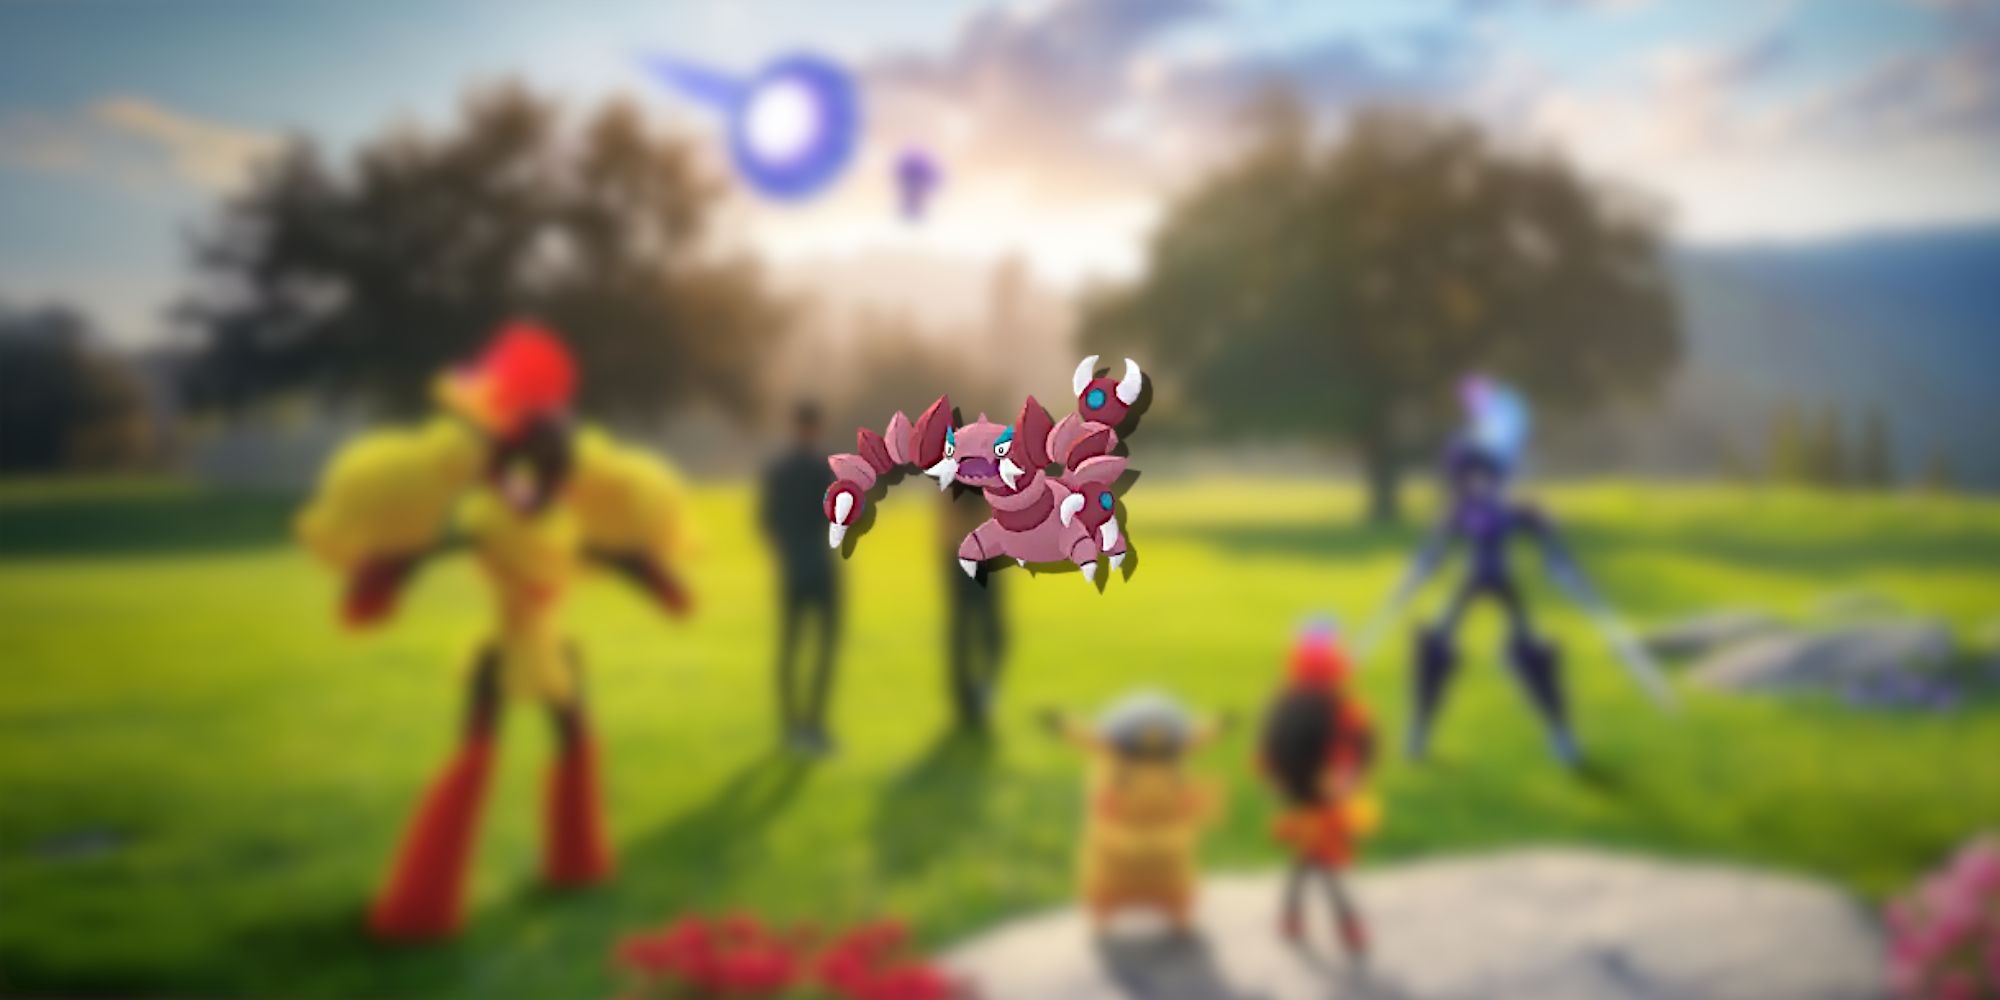 Image of Shiny Drapion in the foreground from Pokemon GO